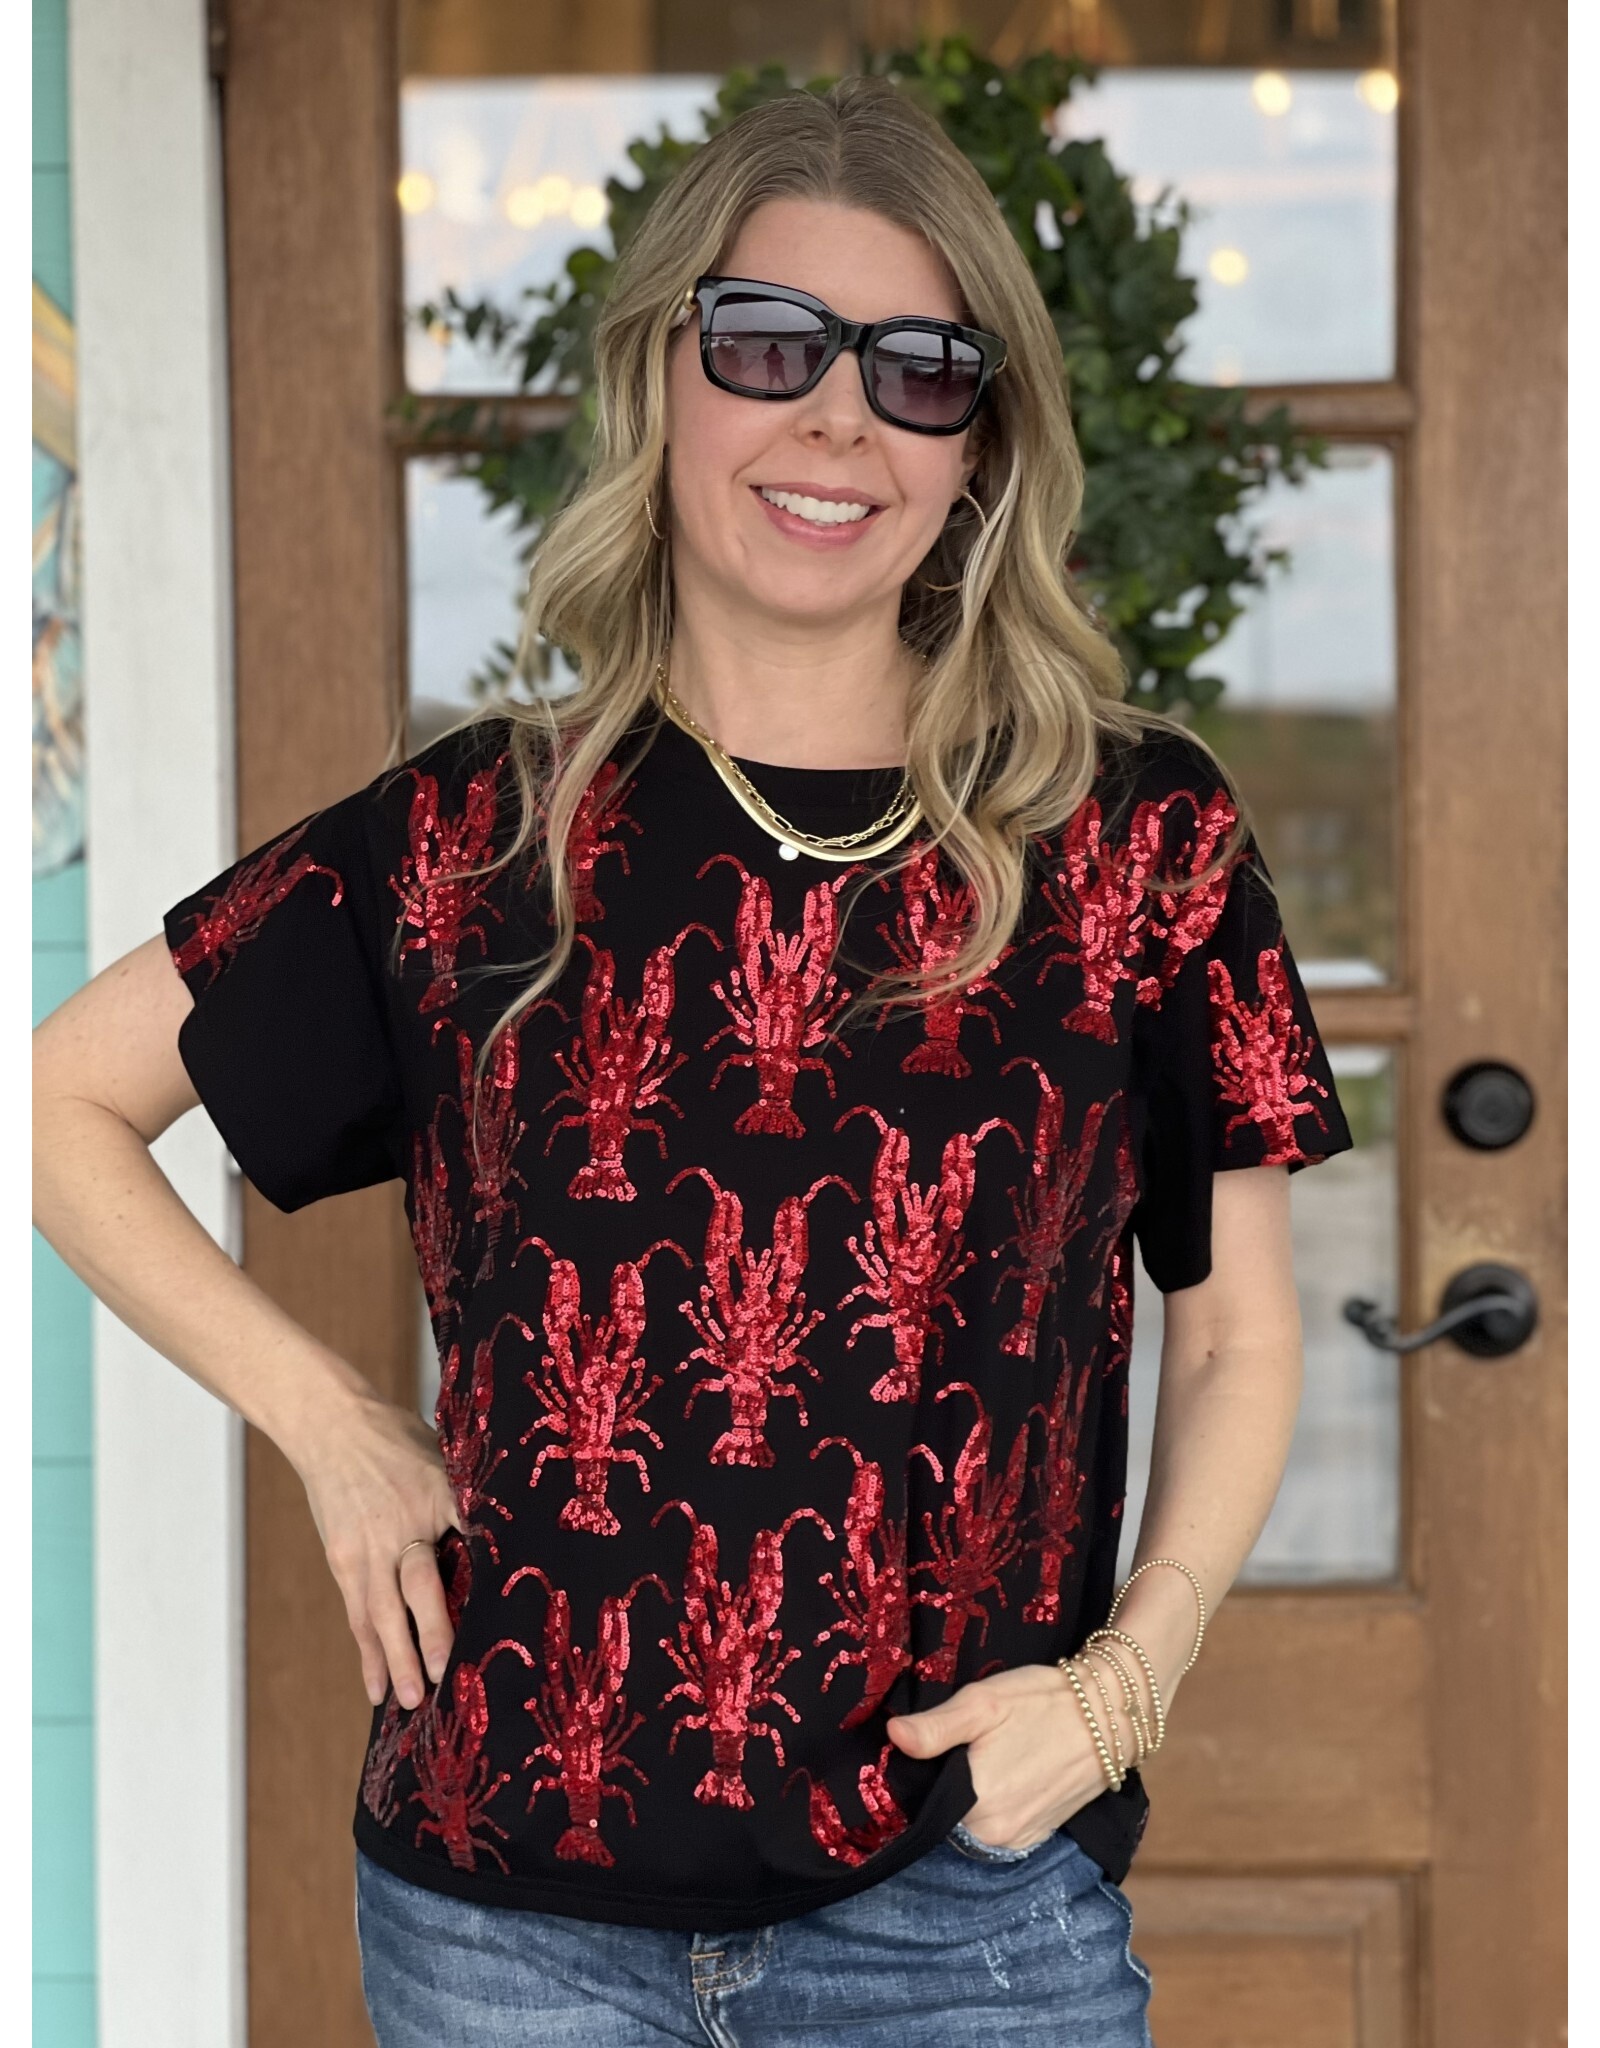 Queen of Sparkles Black & Red Crawfish Tee